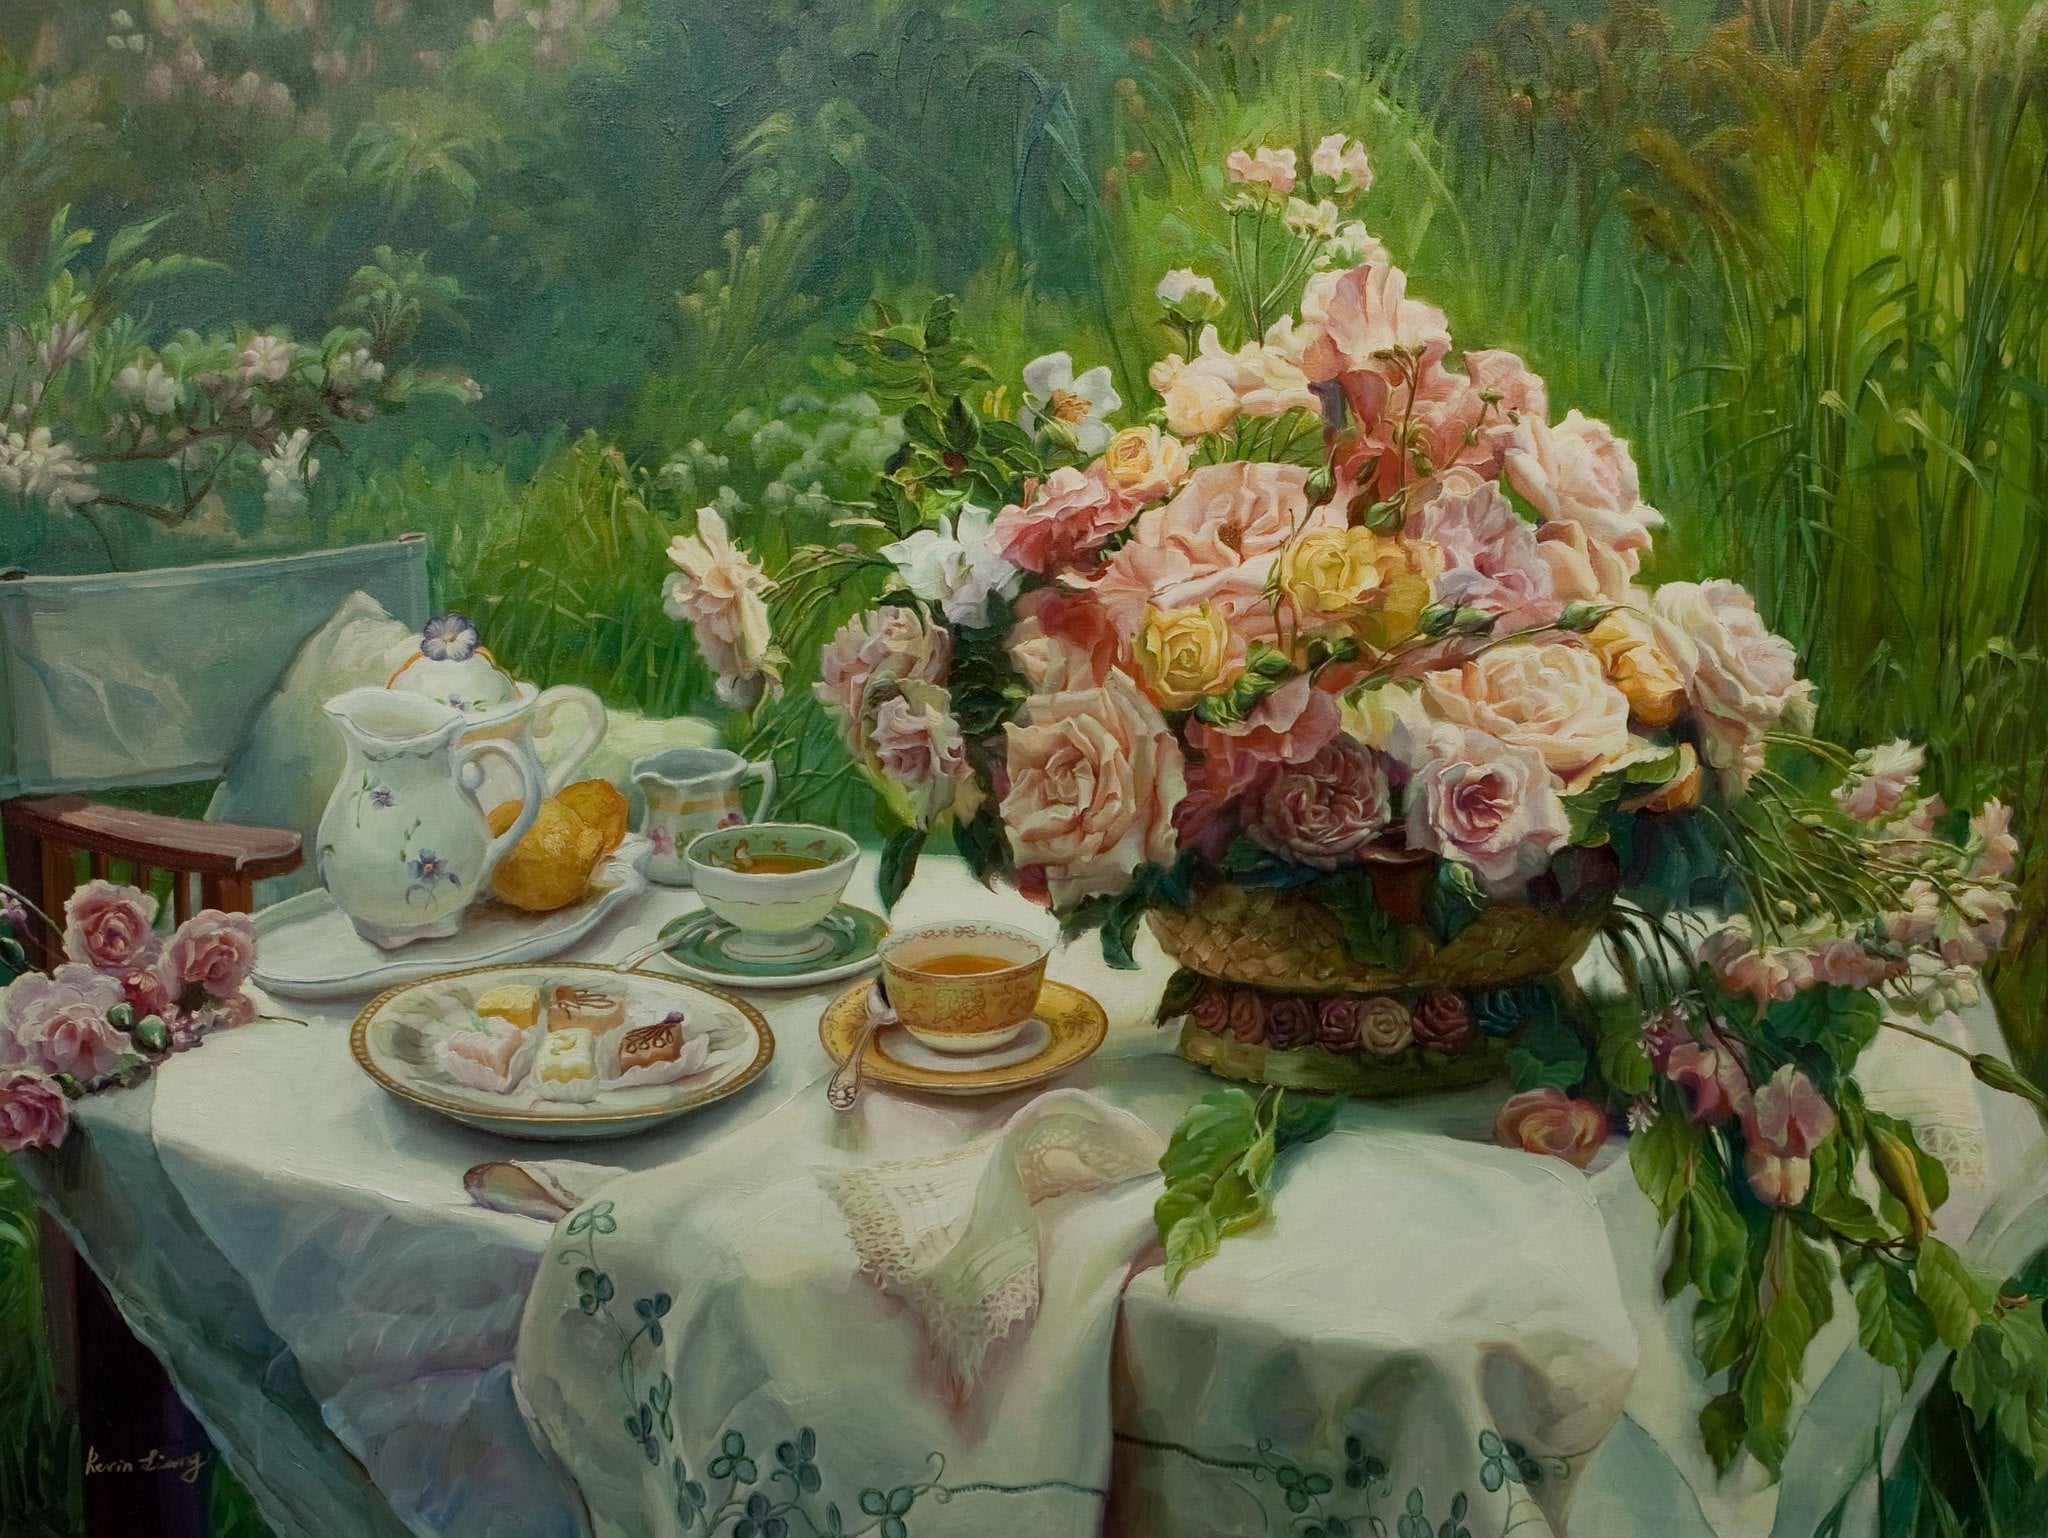 "Tea Break"  Kevin Liang  2006  Original oil on canvas with frame 36" x 46".